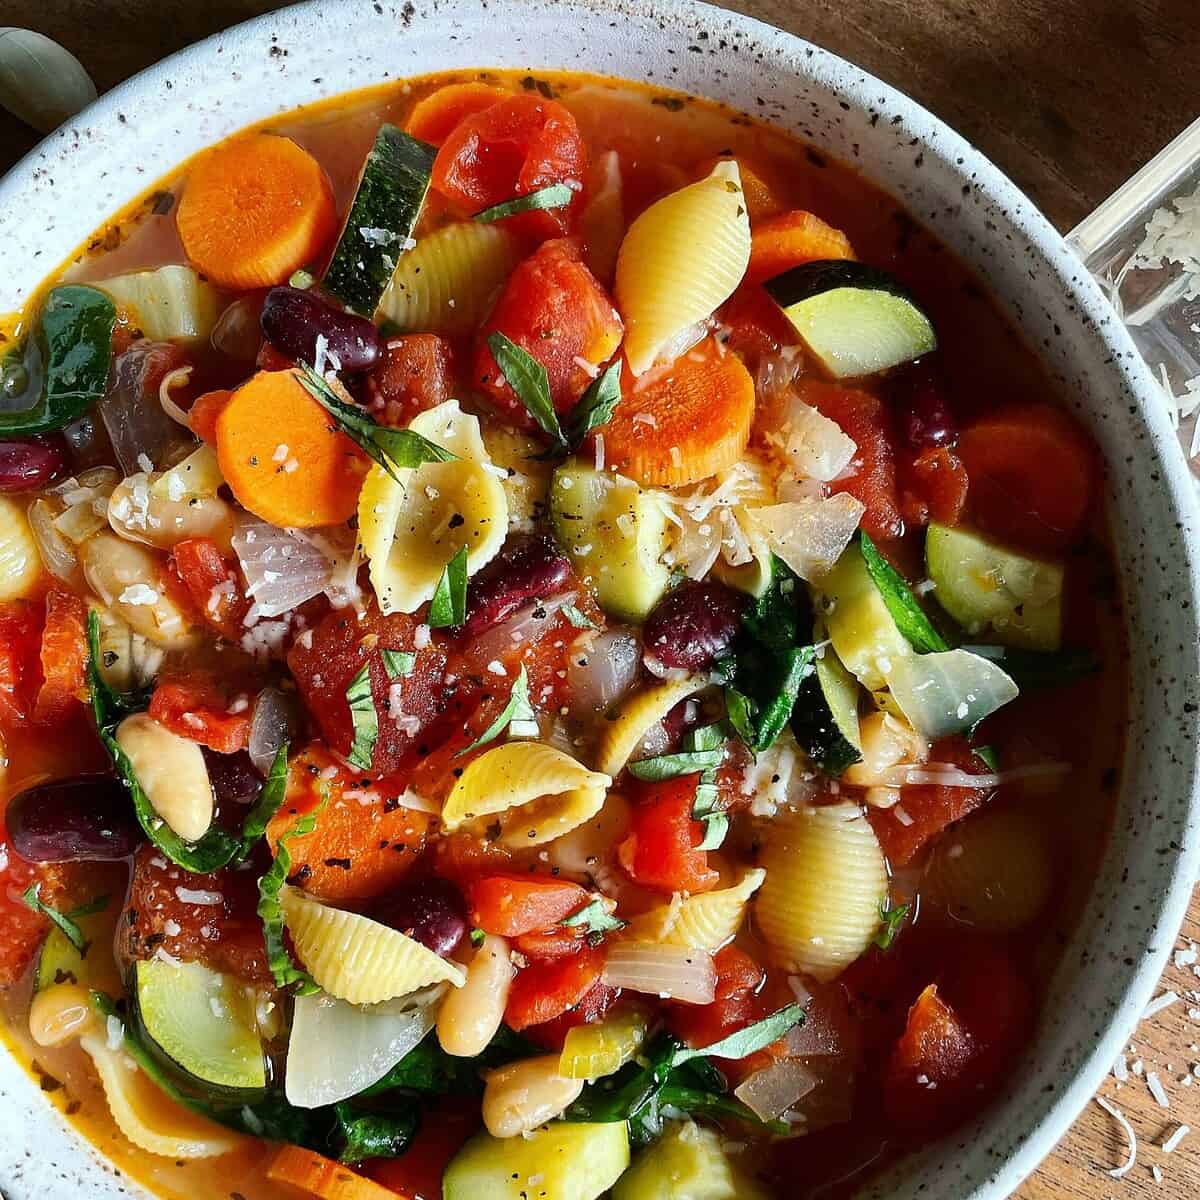  Filled with seasonal veggies and plant-based protein, this soup is a winner 🏆